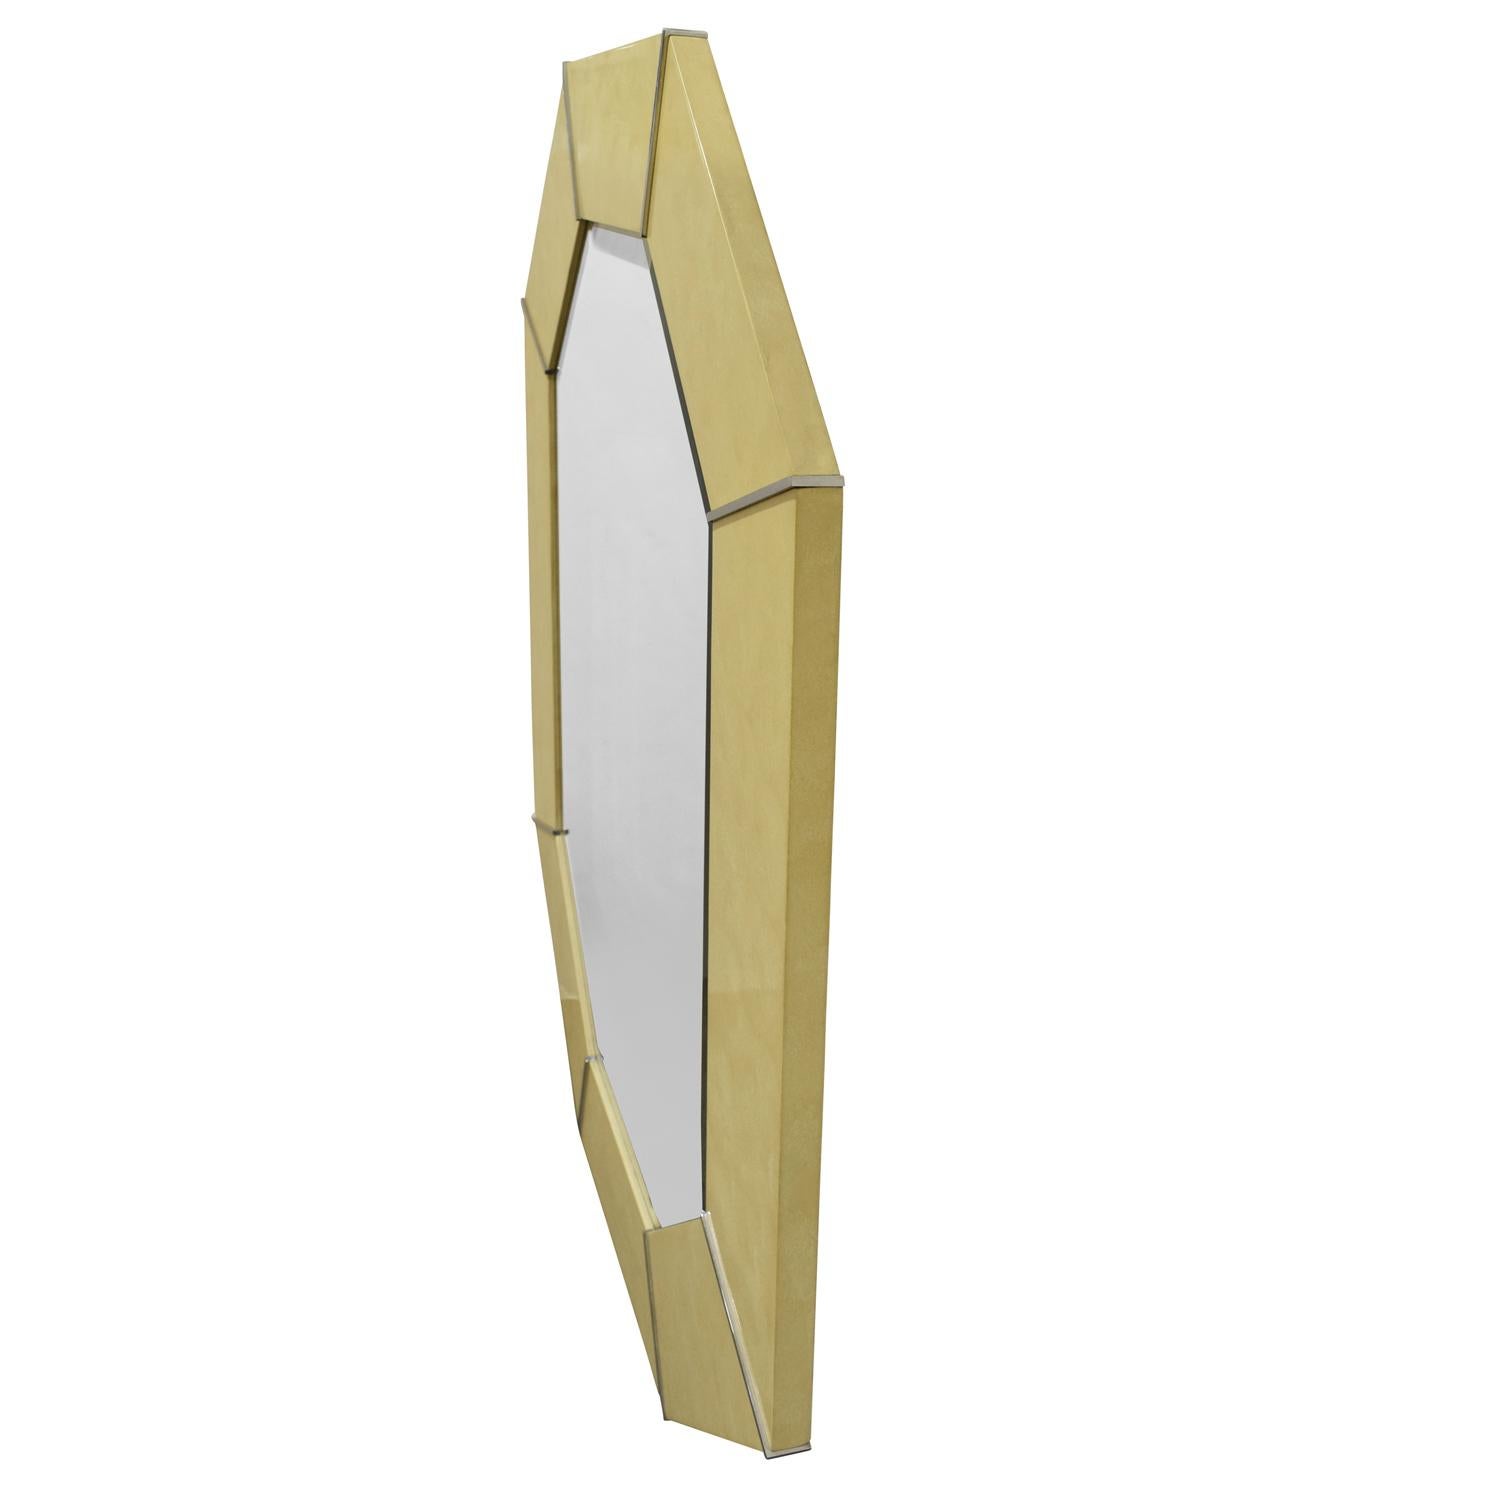 8 Sided mirror with custom artisan ivory lacquer and polished chrome accents by Karl Springer, American, 1970s. The mirror is beveled. A classic Springer design.

Reference:
Karl Springer LTD paper catalog published in the 1970s, section titled